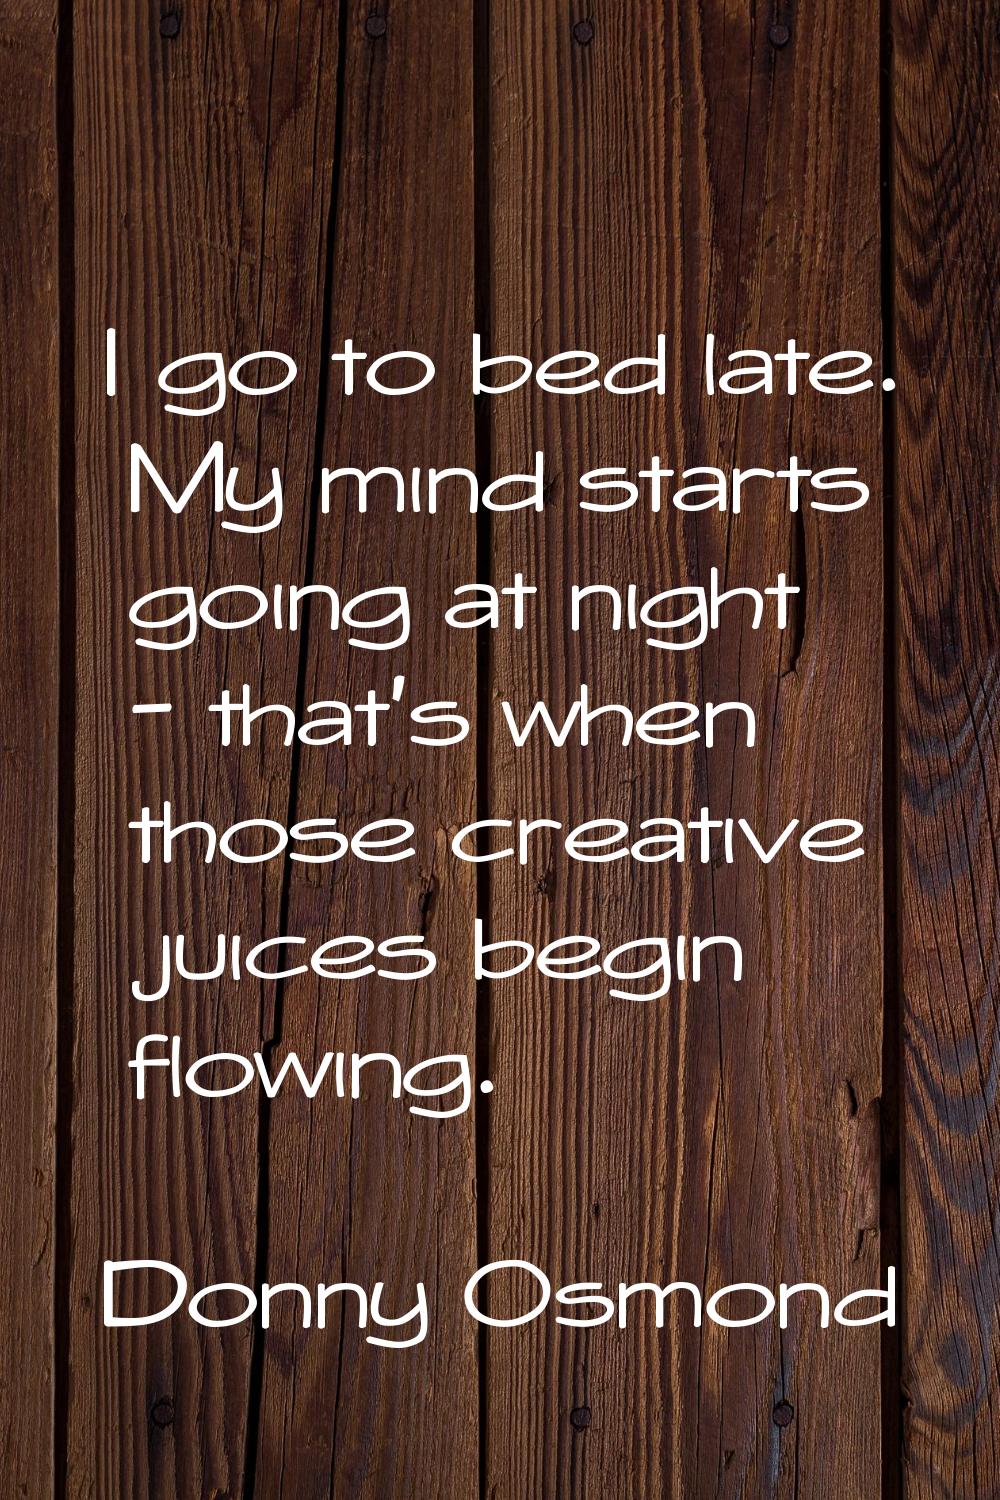 I go to bed late. My mind starts going at night - that's when those creative juices begin flowing.